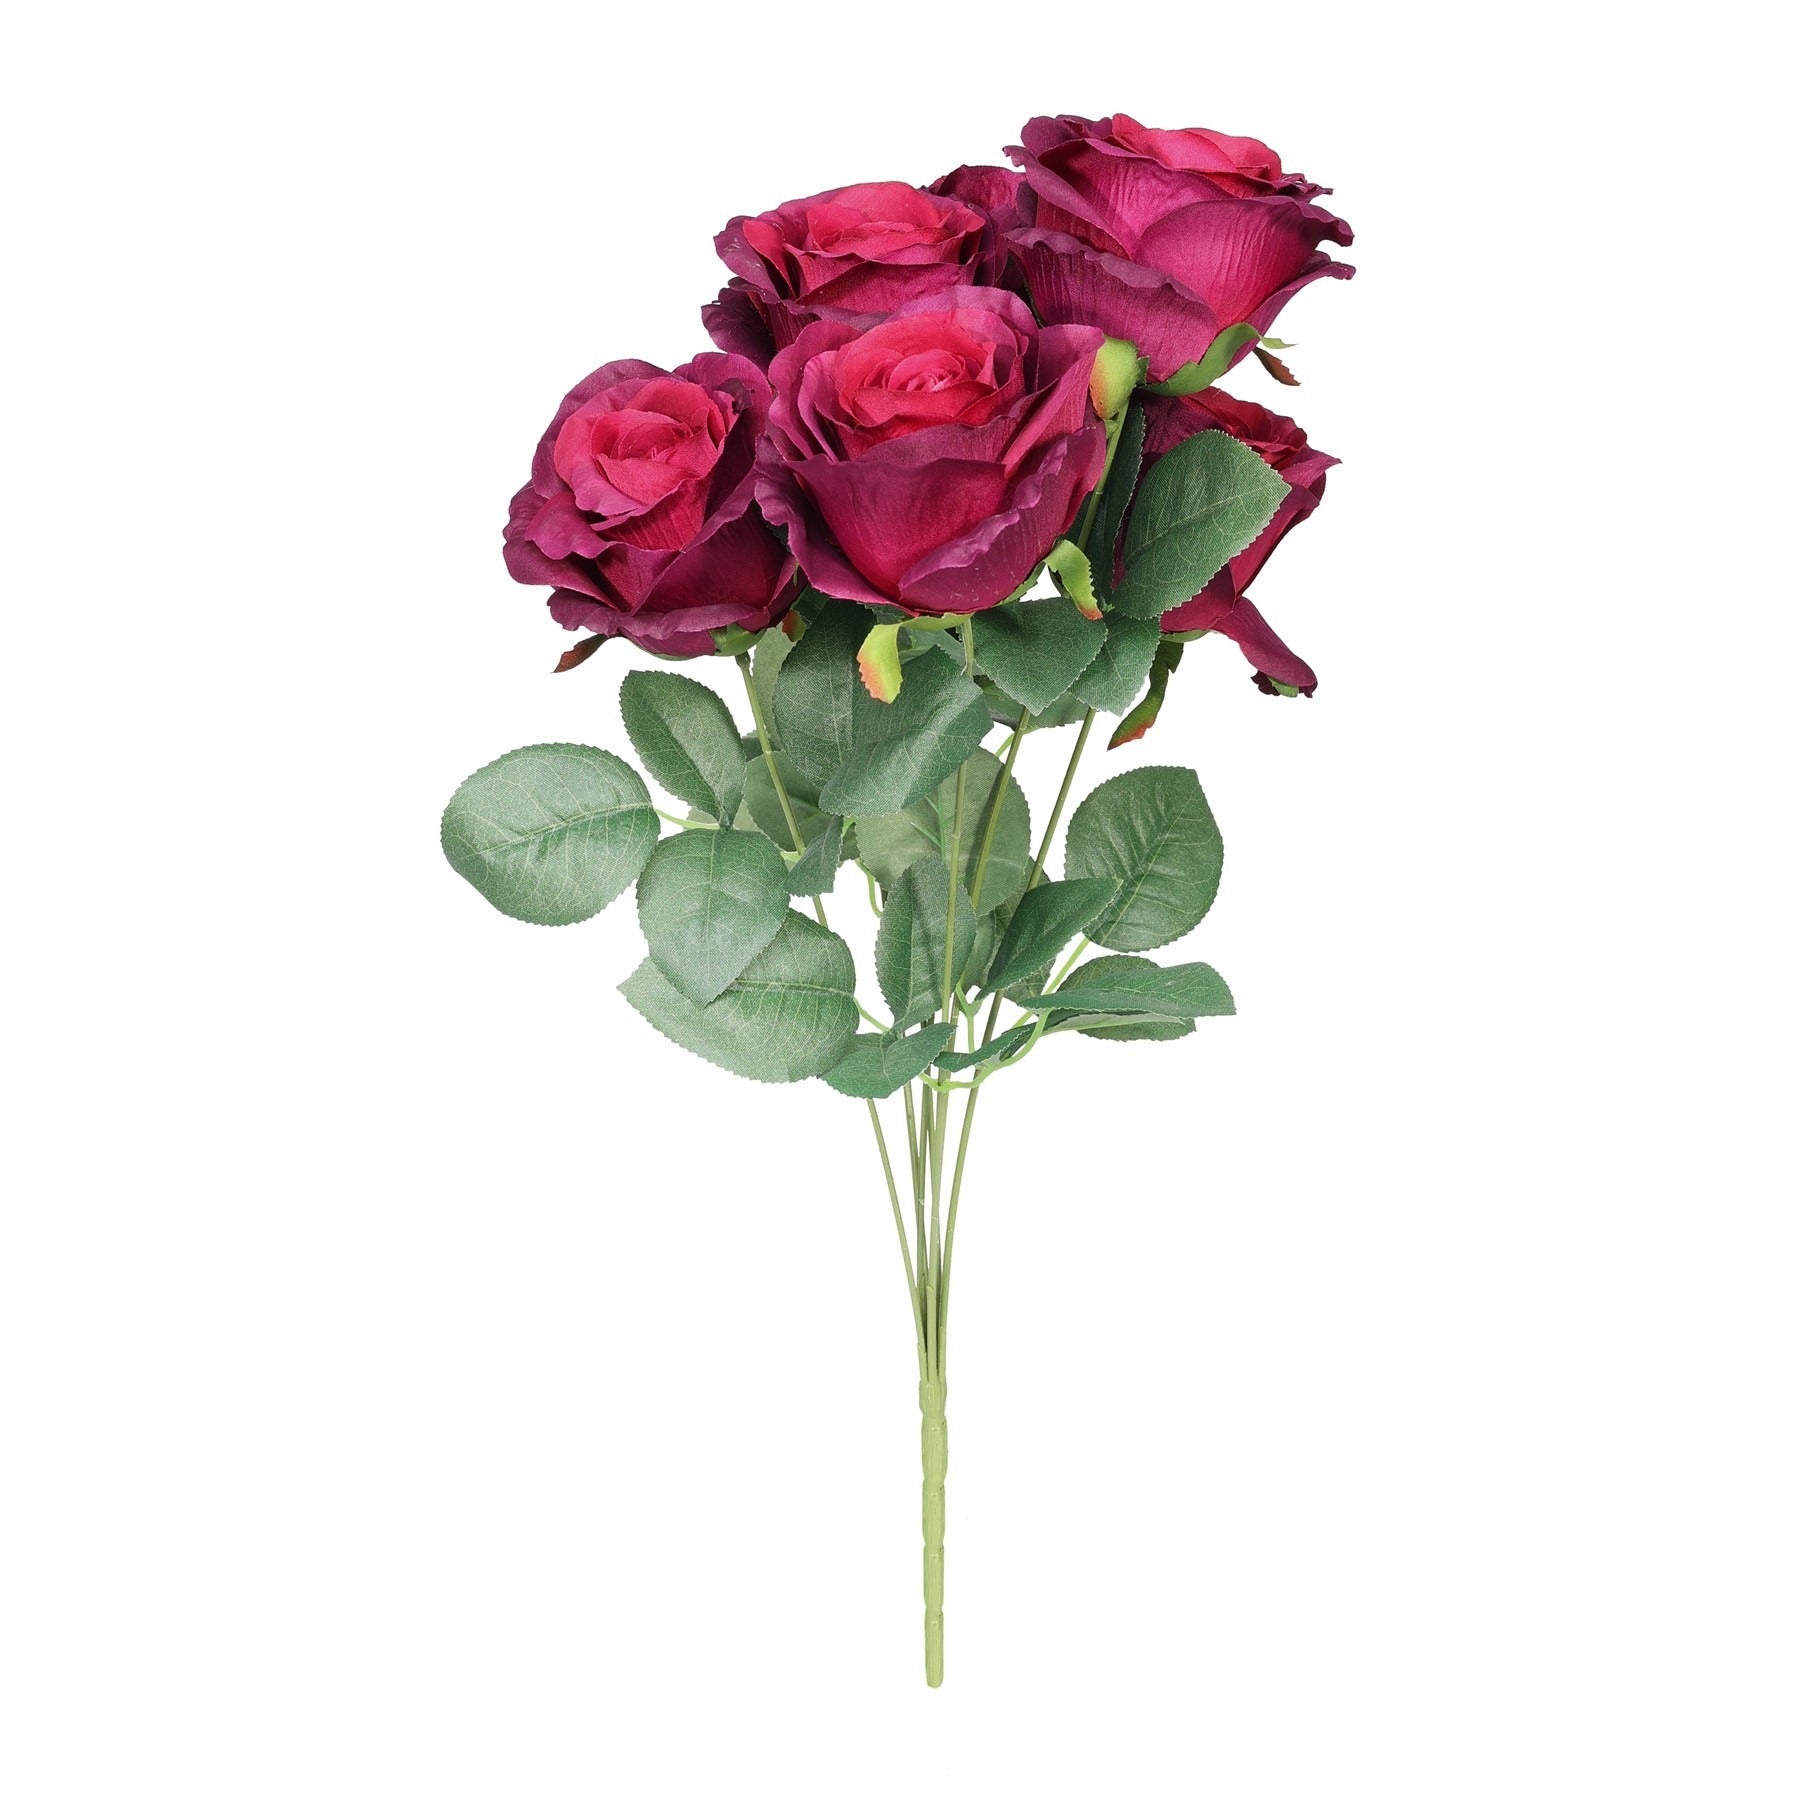 View Camelot Burgundy Rose Bunch 7 Heads information